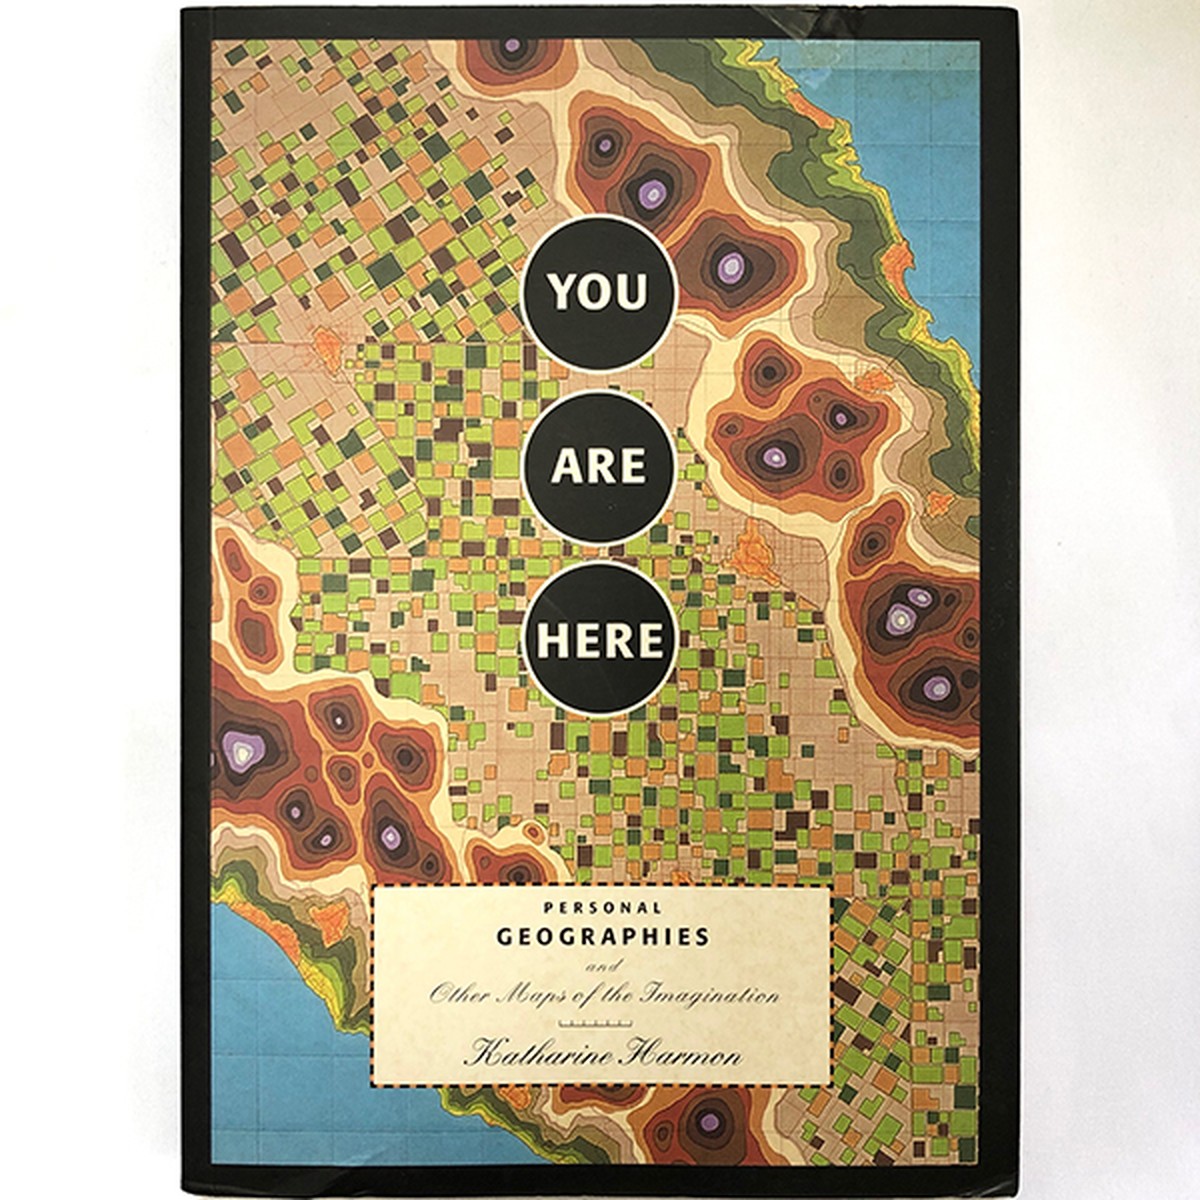 You Are Here Personal Geographies Other Maps Of Imaginathion Mondo Modern モンド モダーン